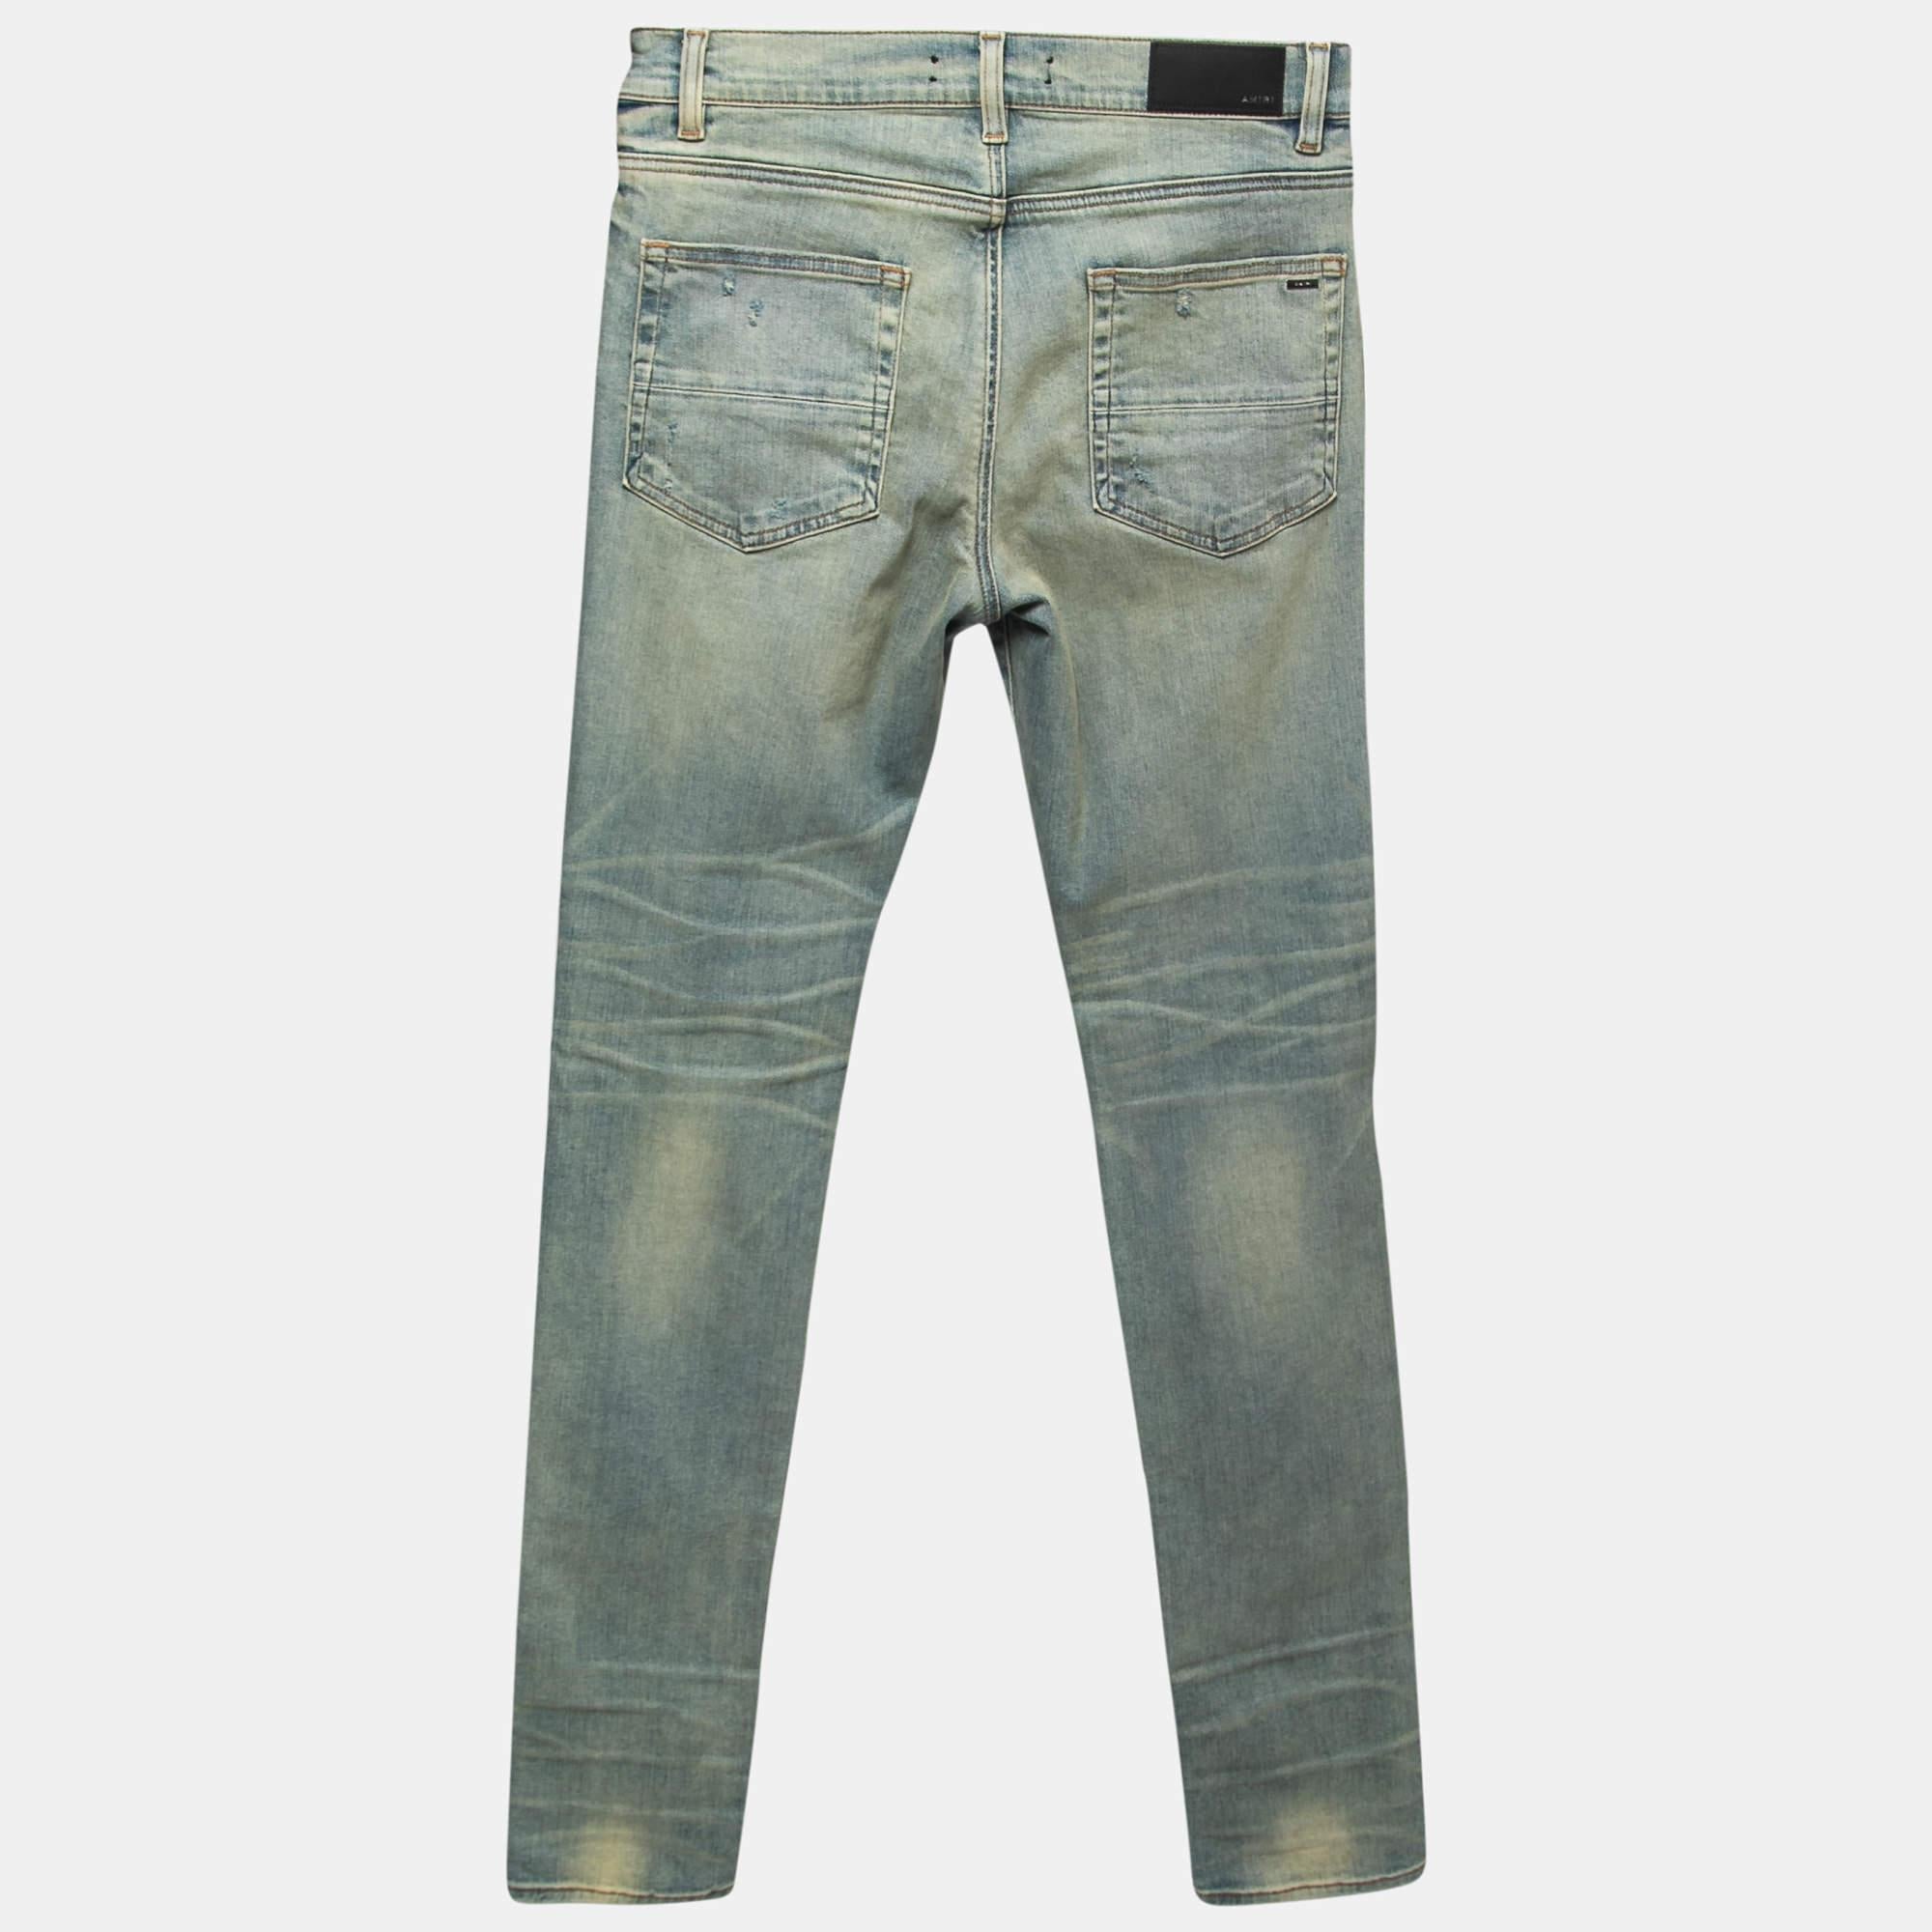 A must-have for your casual wardrobe, these Amiri jeans are made of denim offering a comfortable wearing experience. They carry a blue hue with a distressed finish. These well-fitting jeans have multiple pockets and a buttoned closure.

